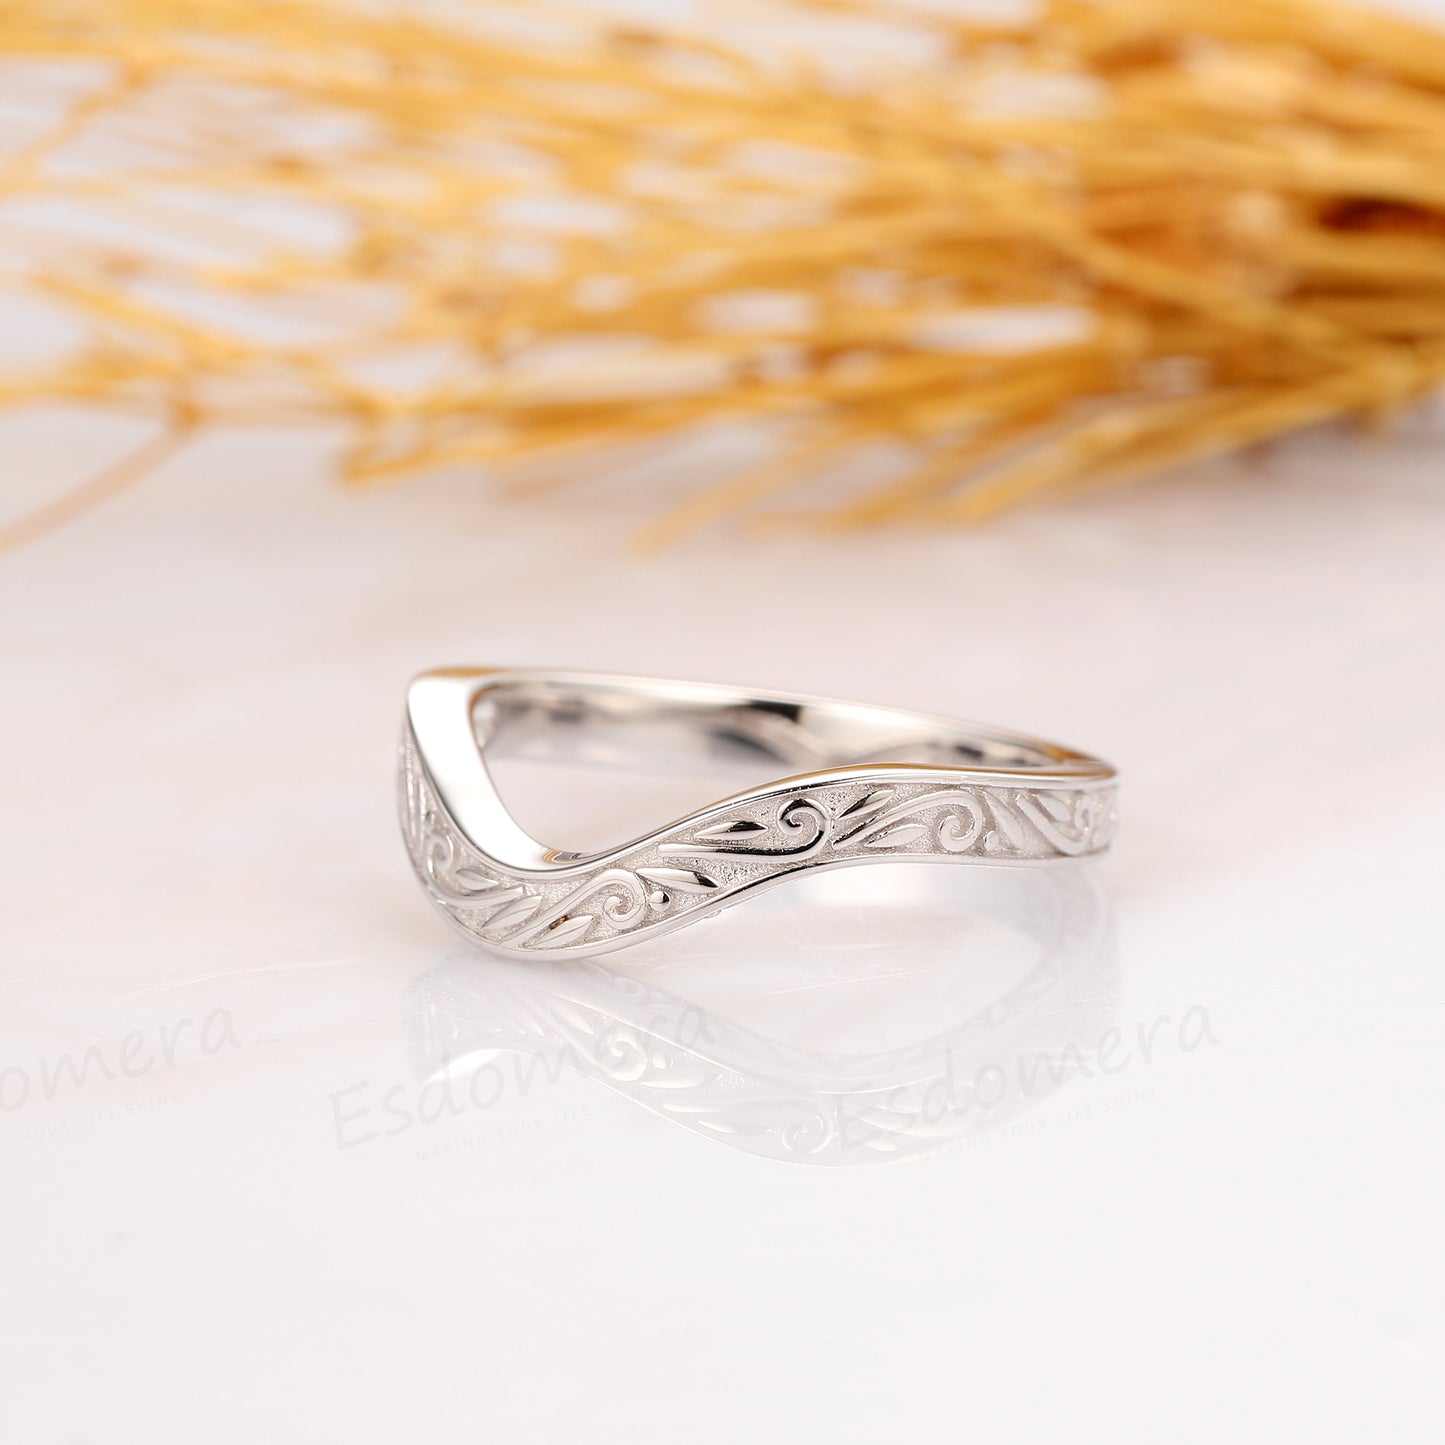 Solid 14k White Gold Wedding Band, Curved Design Matching Ring